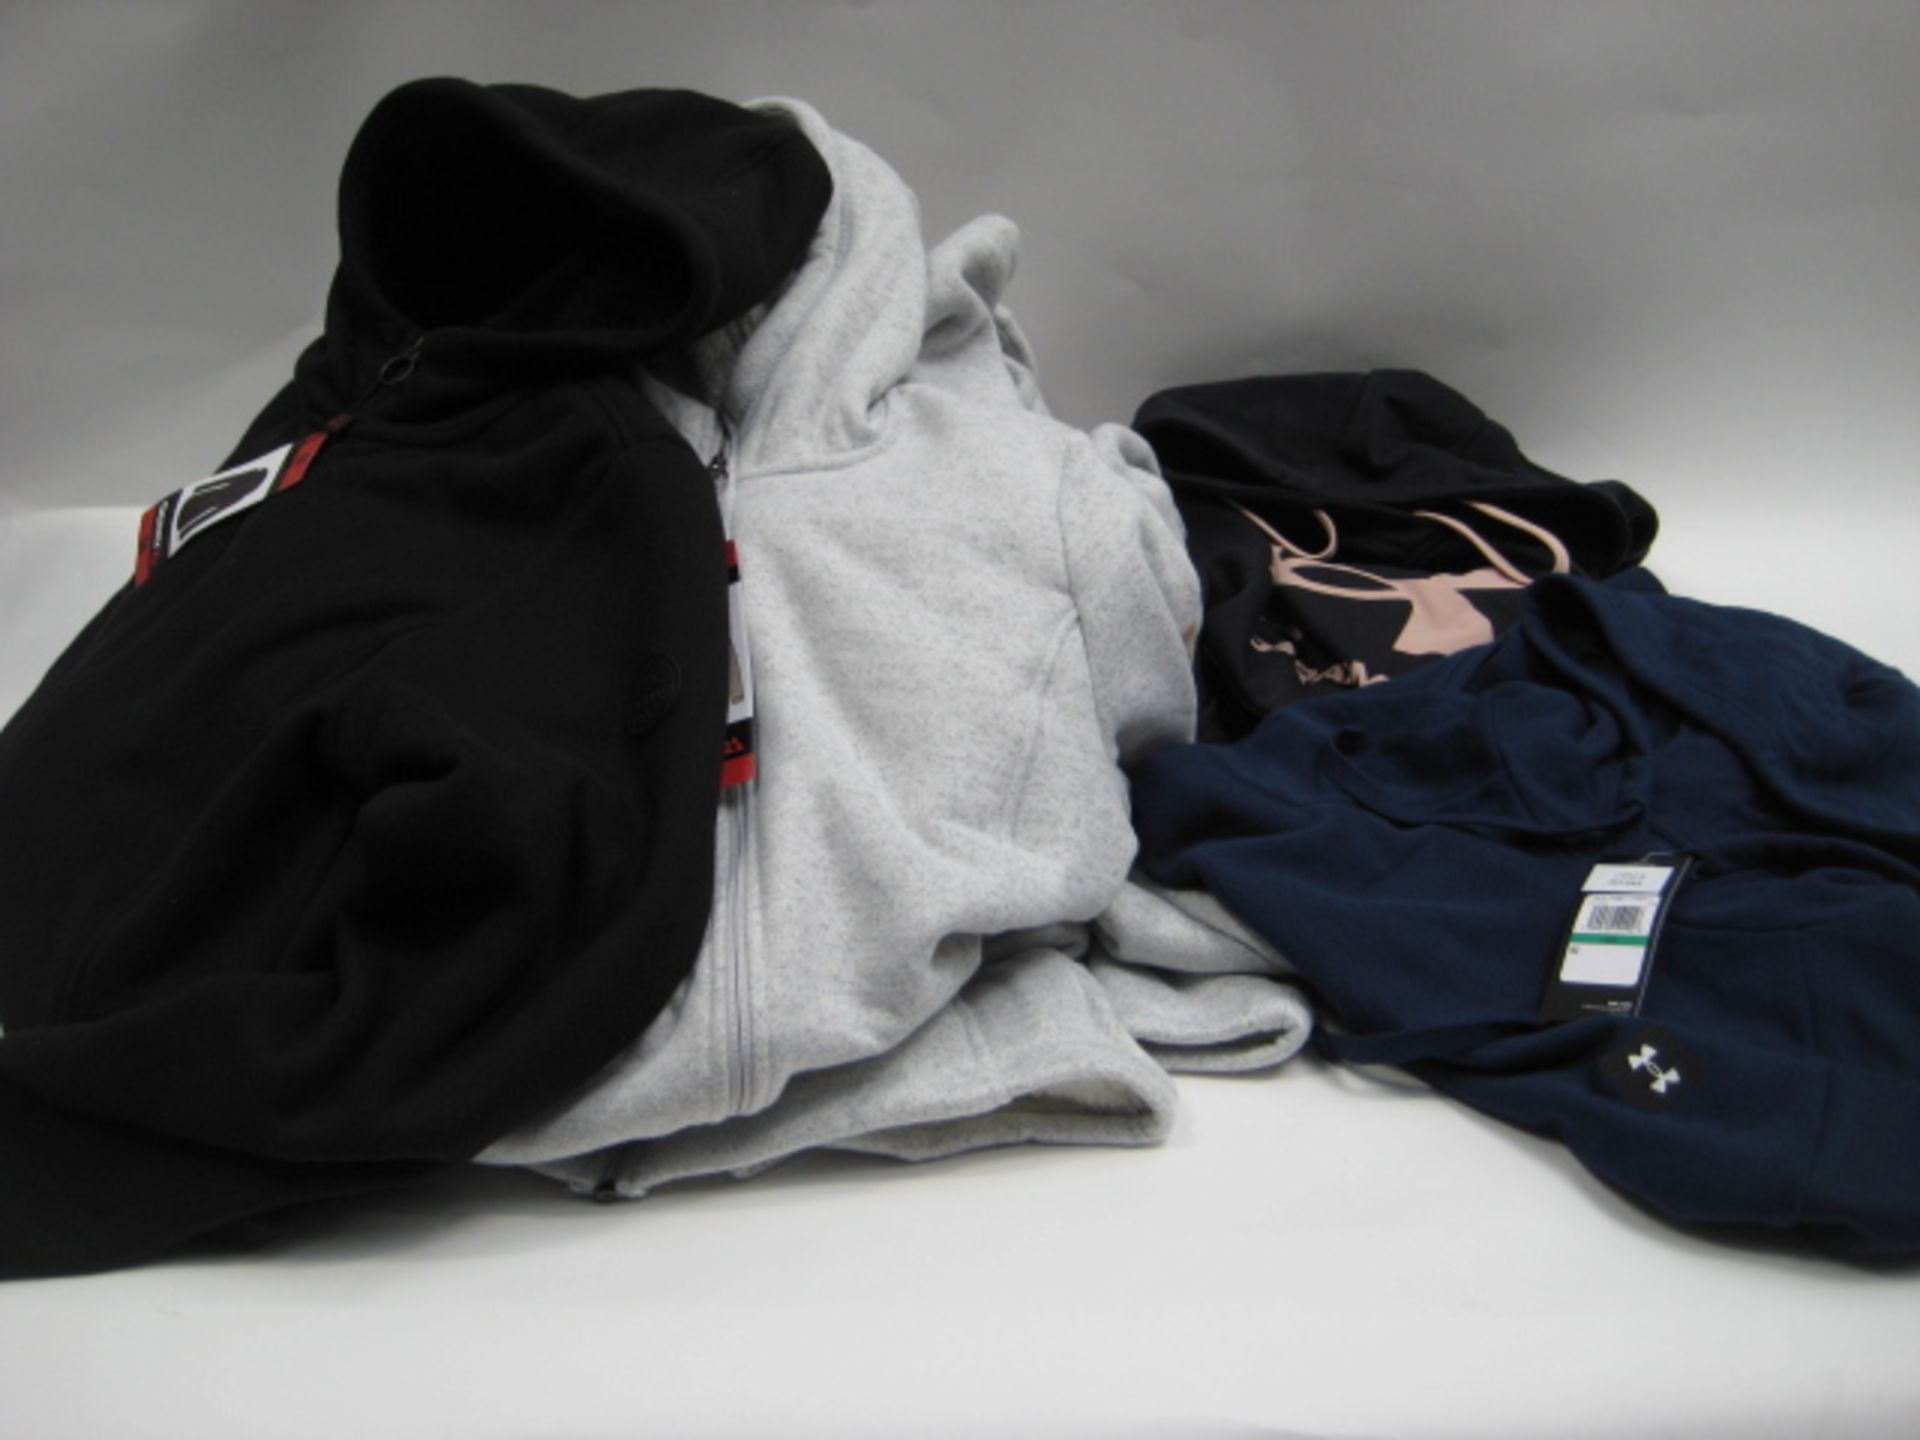 Bag containing 5 Jerry hoodies in grey, 1 Jerry hoody in black and 2 Under Armour hoodies in black